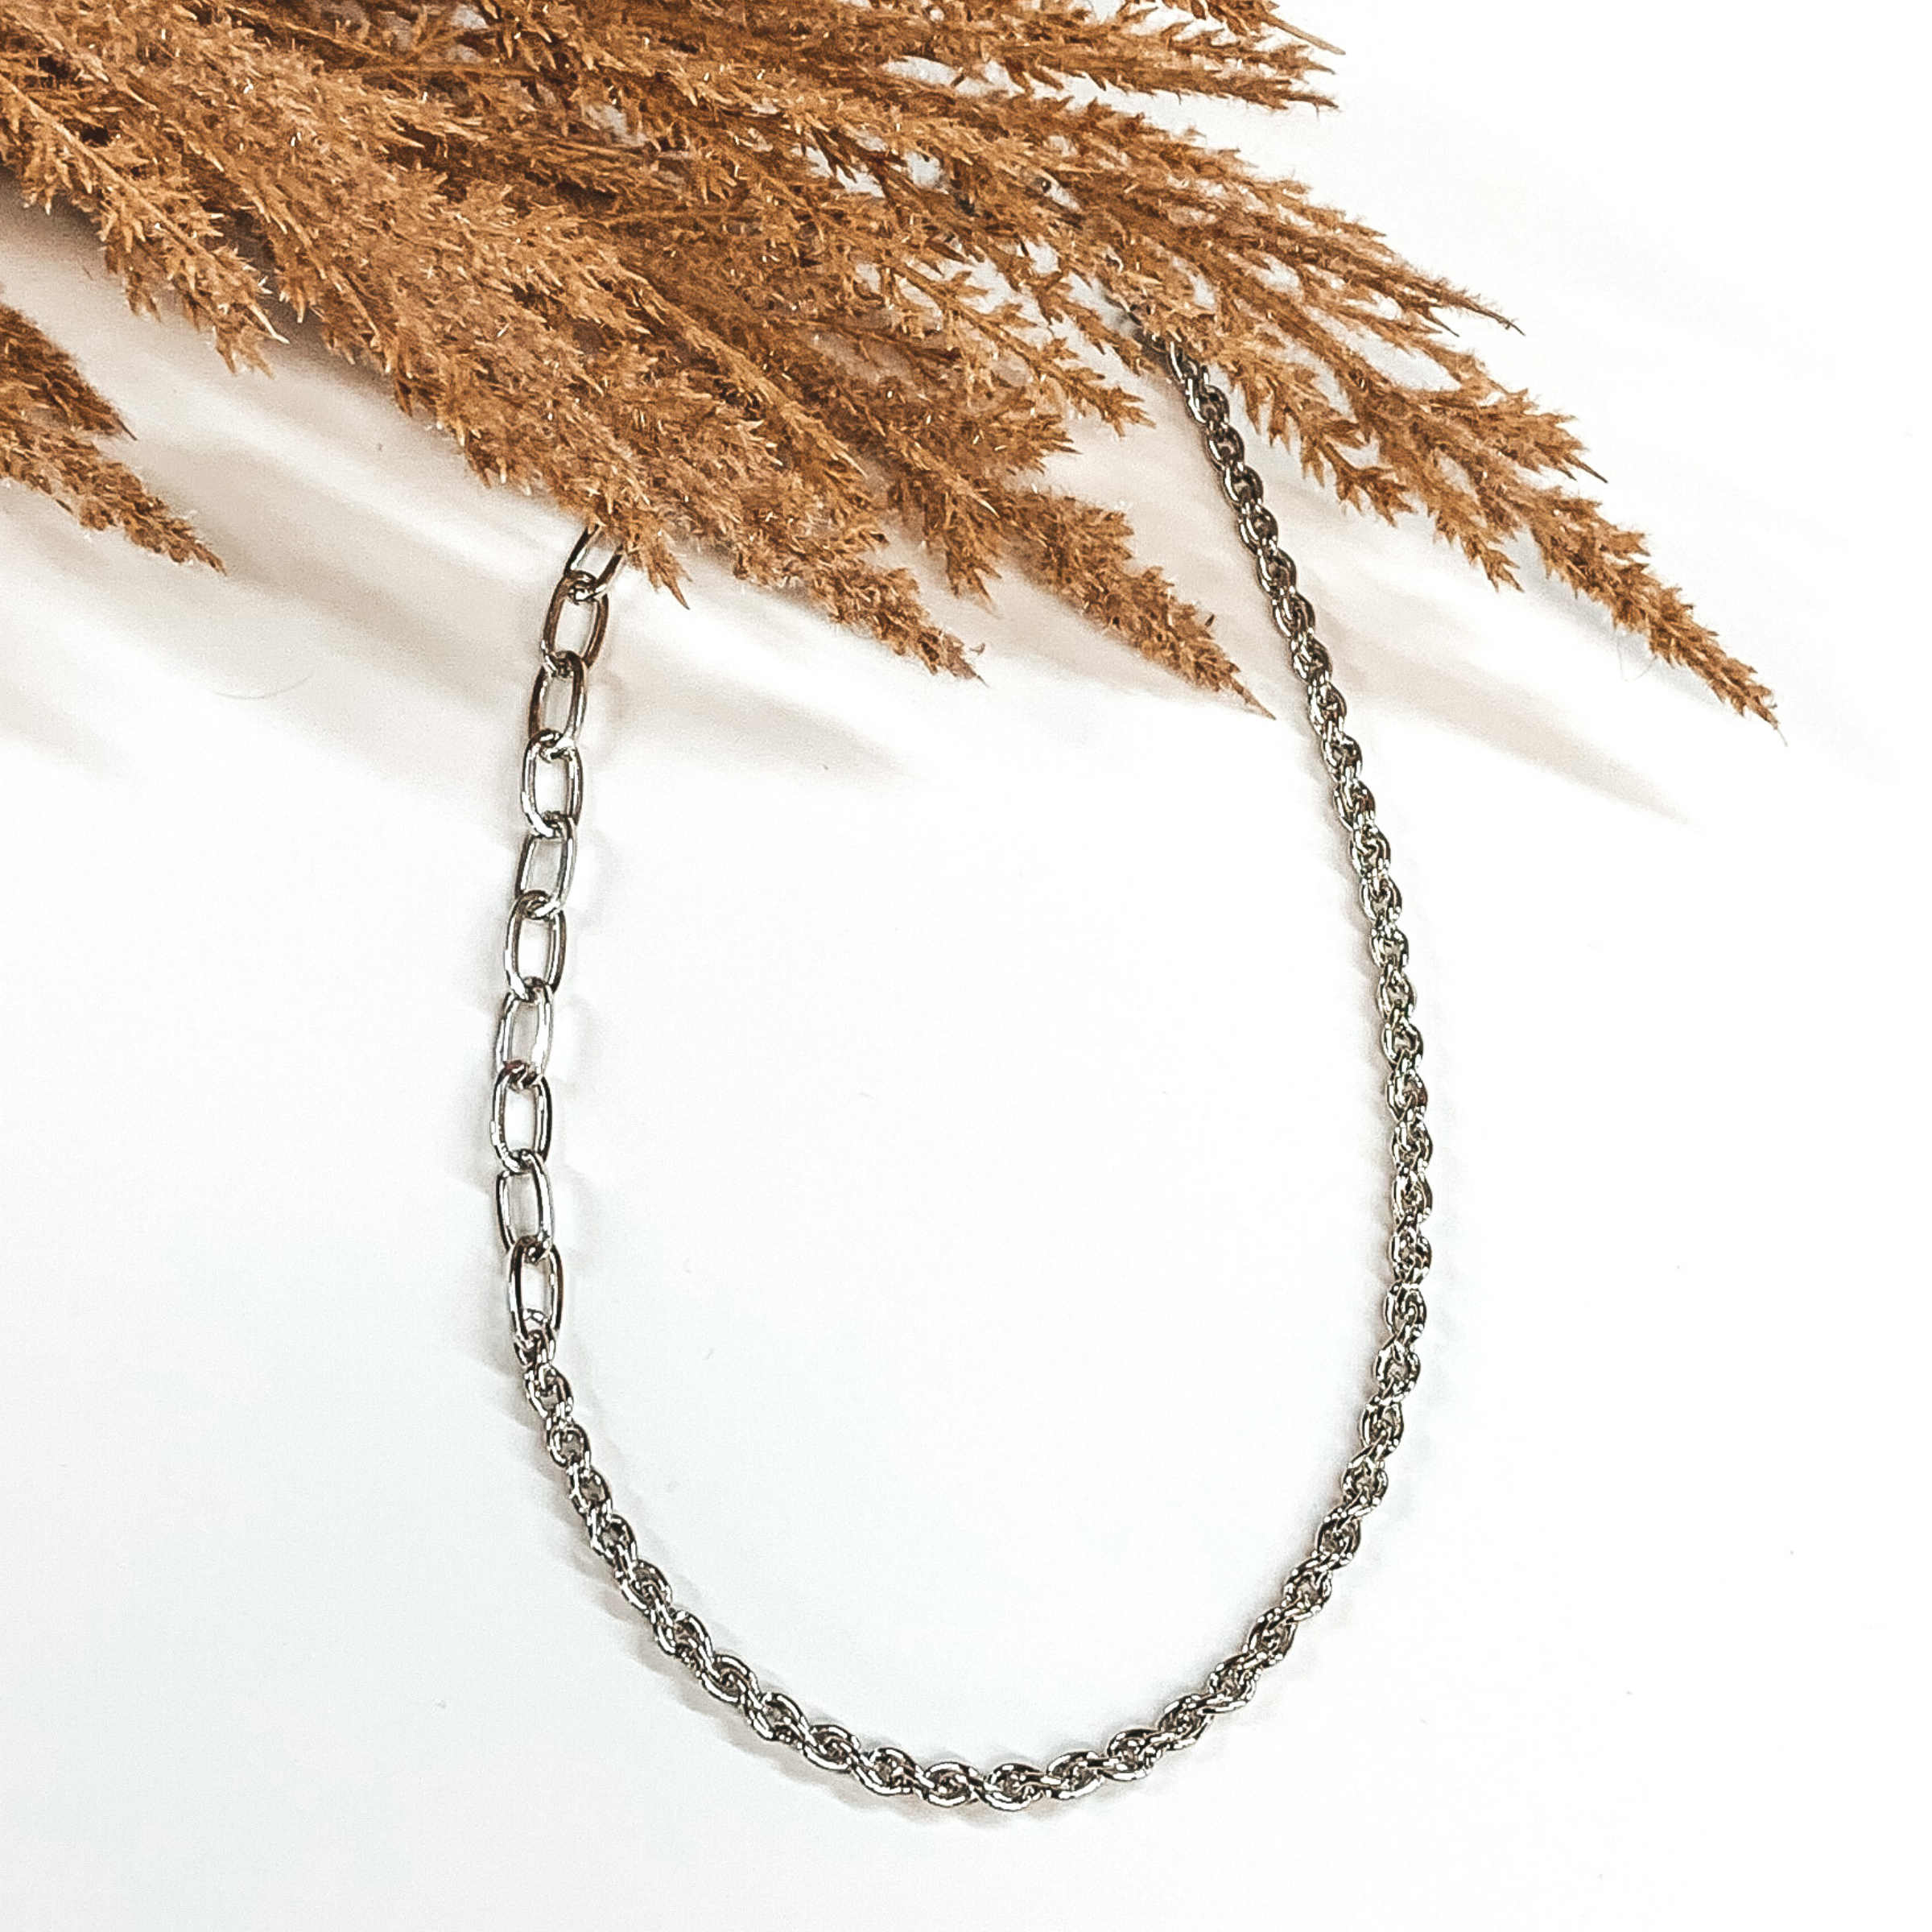 A single silver chained necklace. This necklace includes two different types of chains on the same strand. This necklace is pictured on a white background with tan floral at the top. 